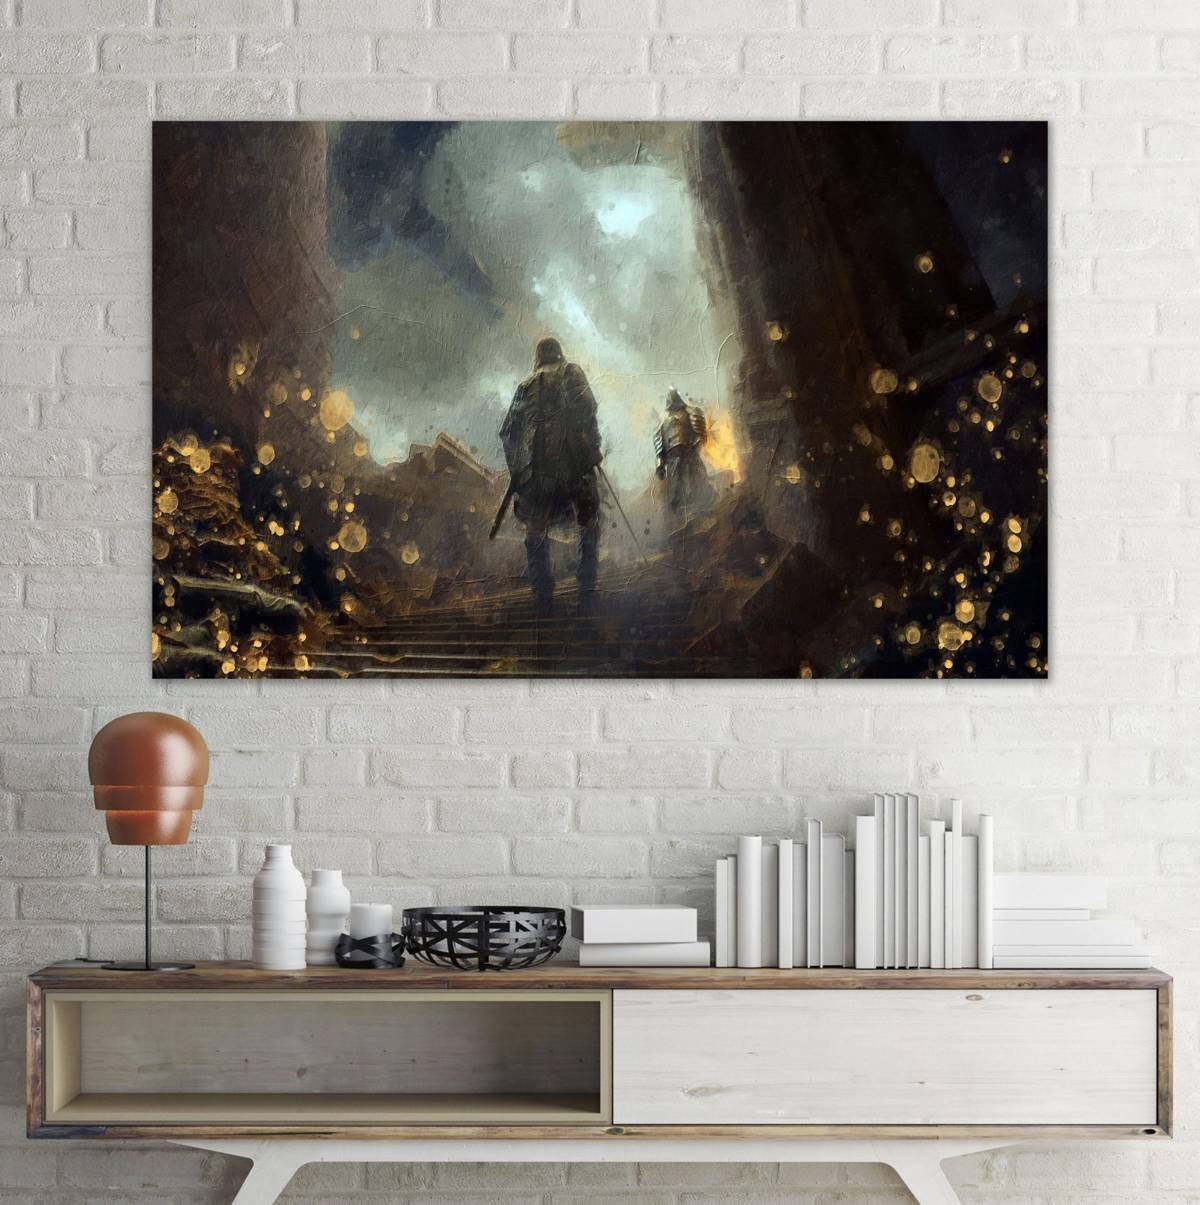 Cleganebowl Game Of Thrones Wall Art Picture Print Home Decor – Poster ...